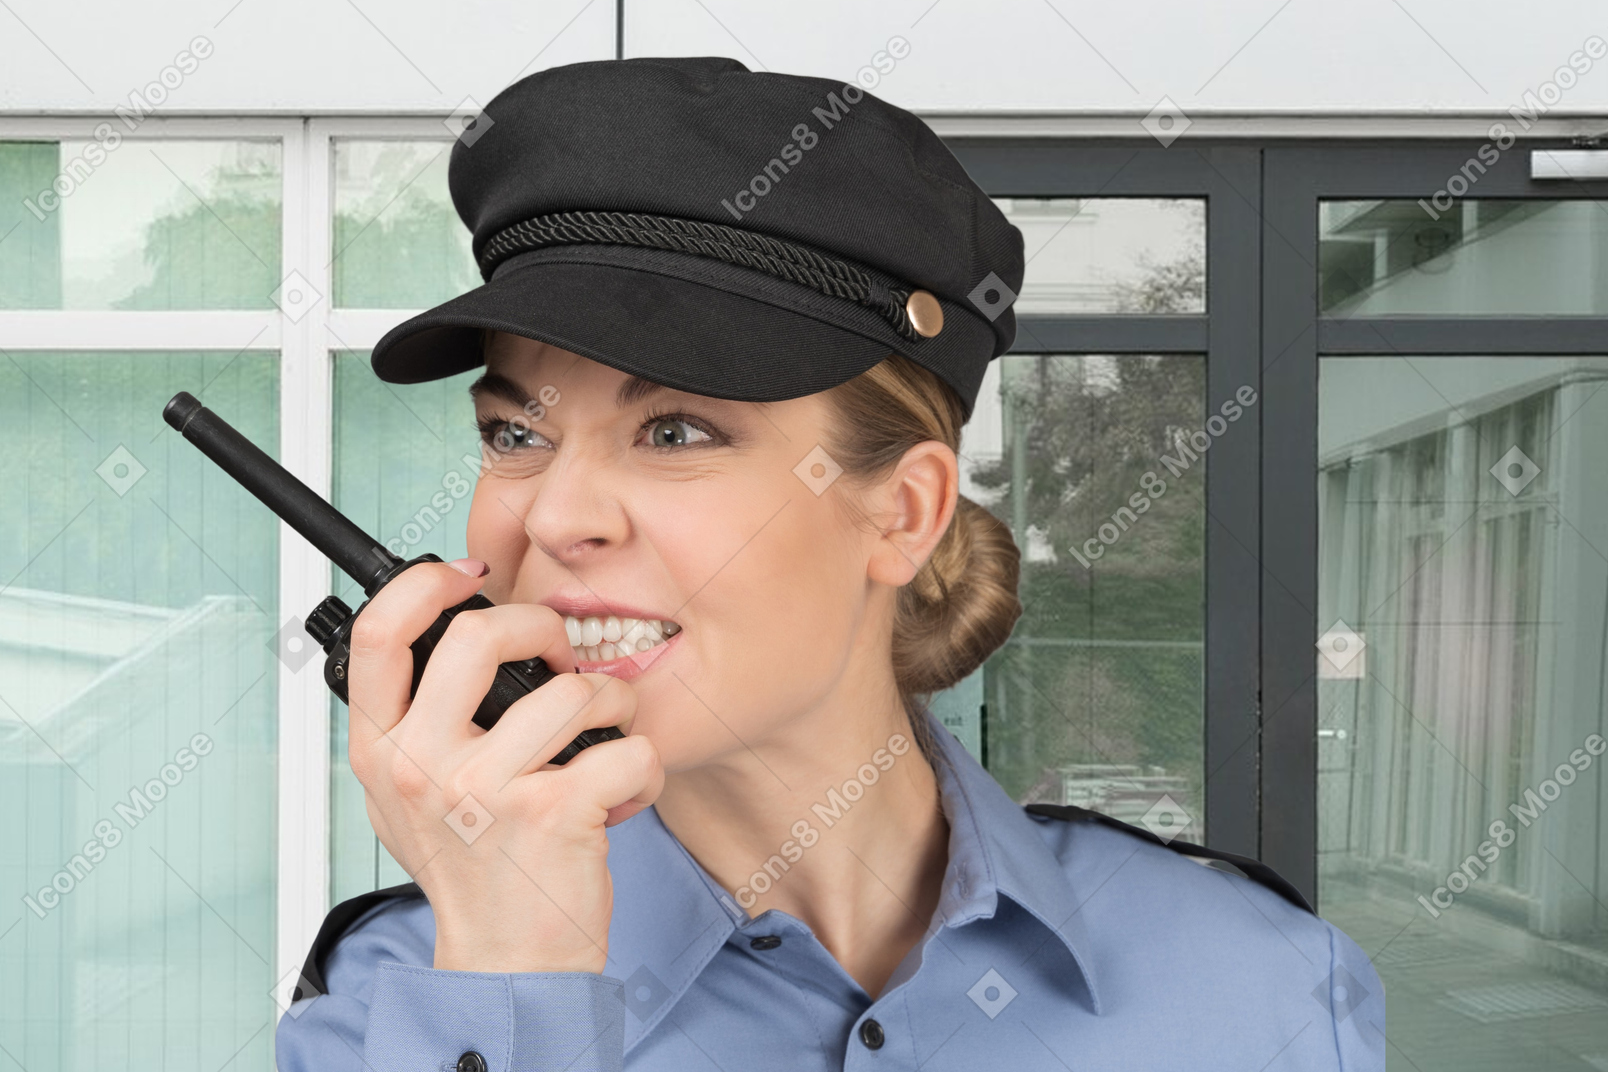 An angry policewoman talking on walkie talkie